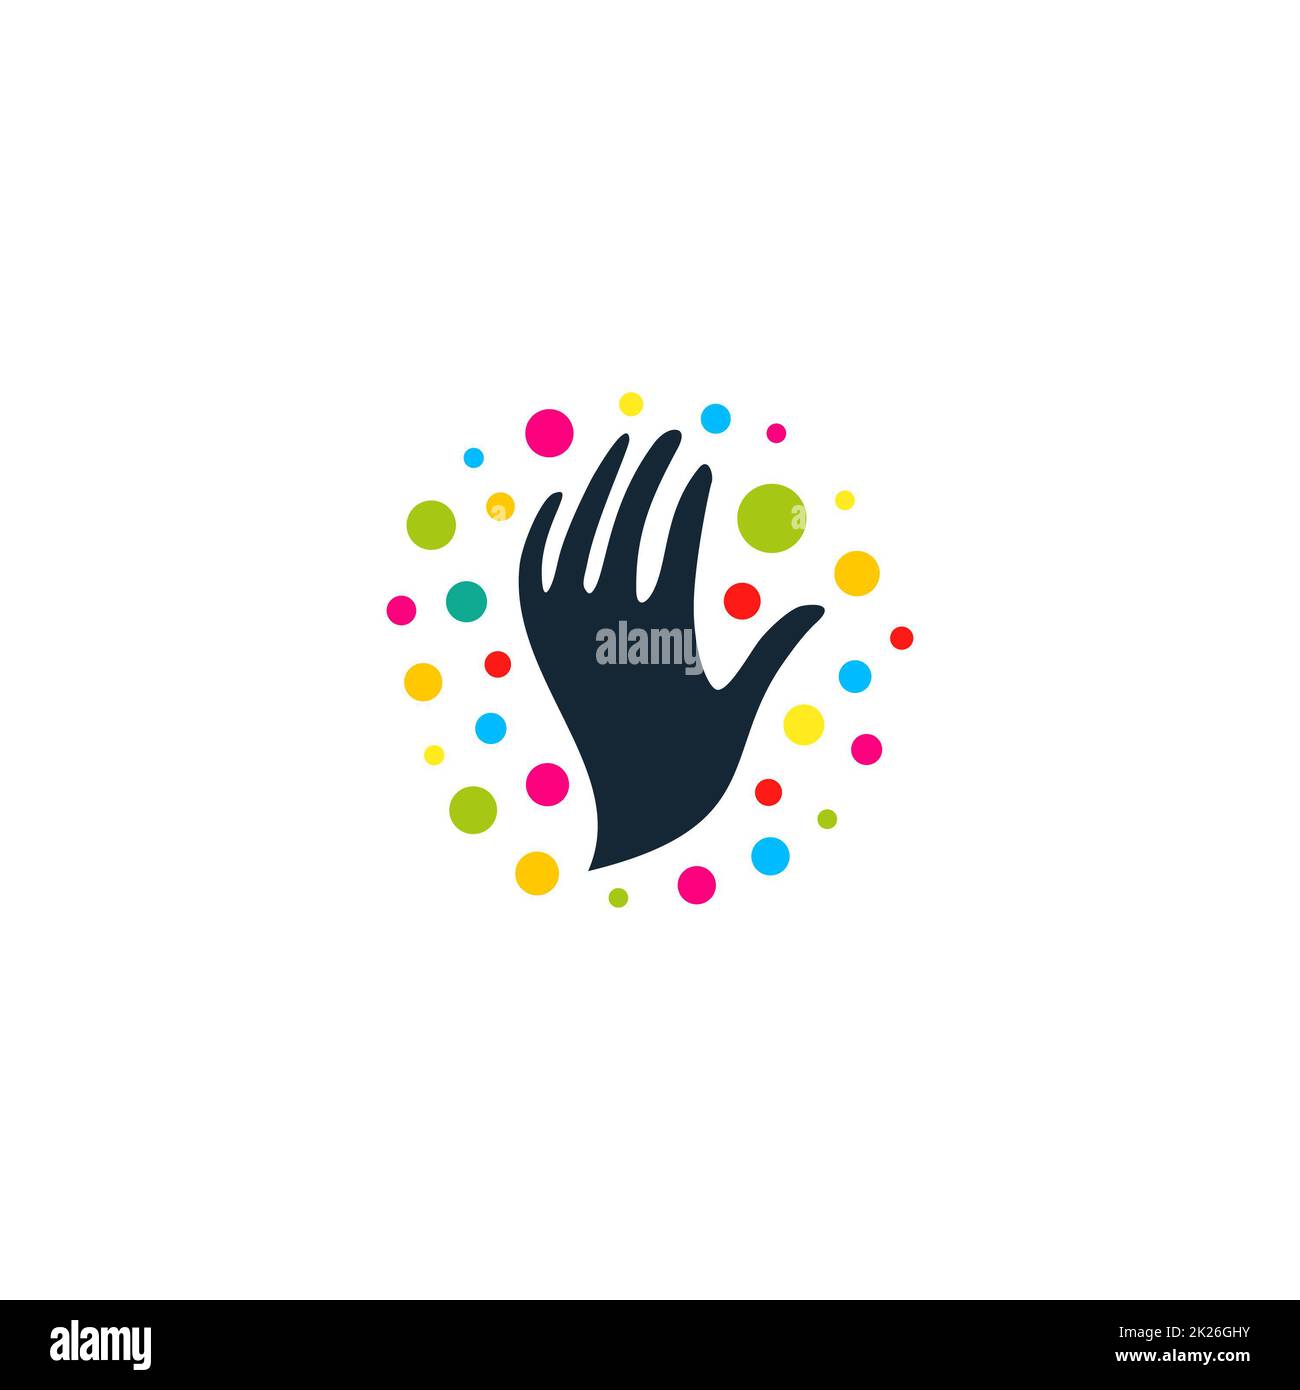 Round logo with the image of black hands, colorful balloons and merry festive beads around his hands vector illustration Stock Photo